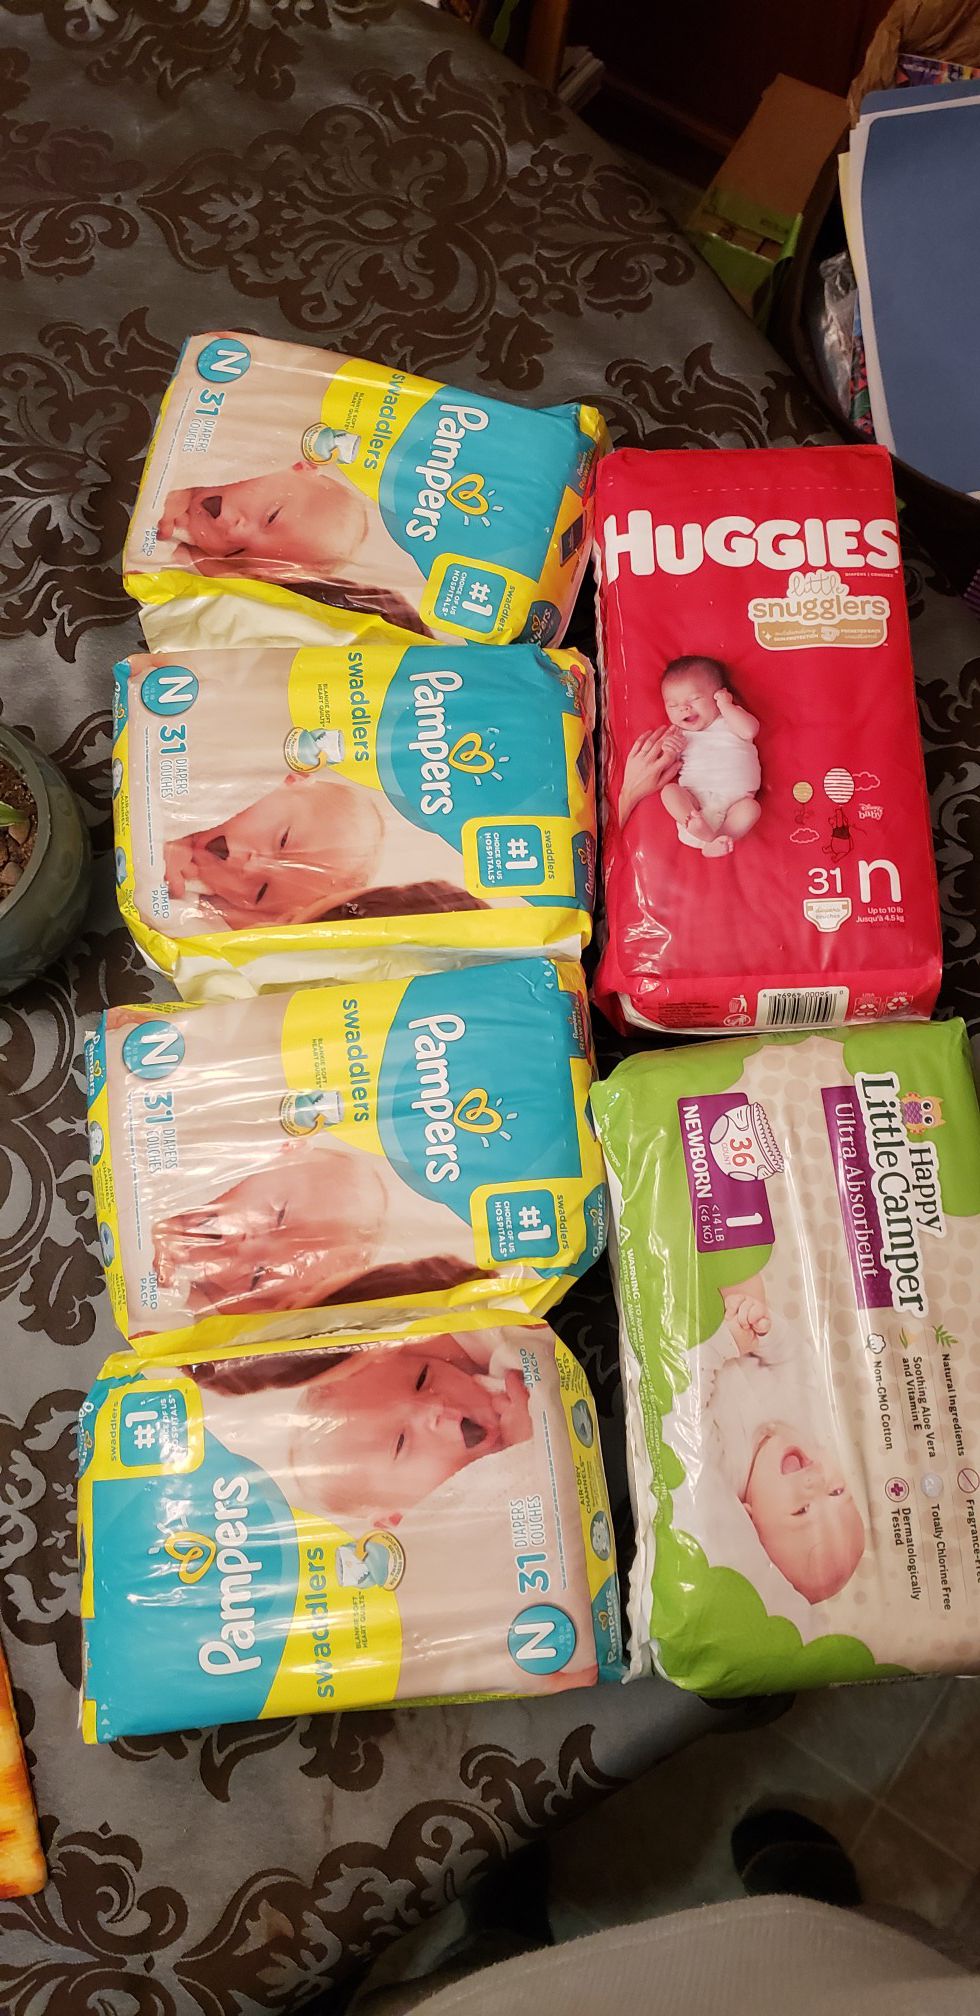 Unopened Huggies and Pampers diapers